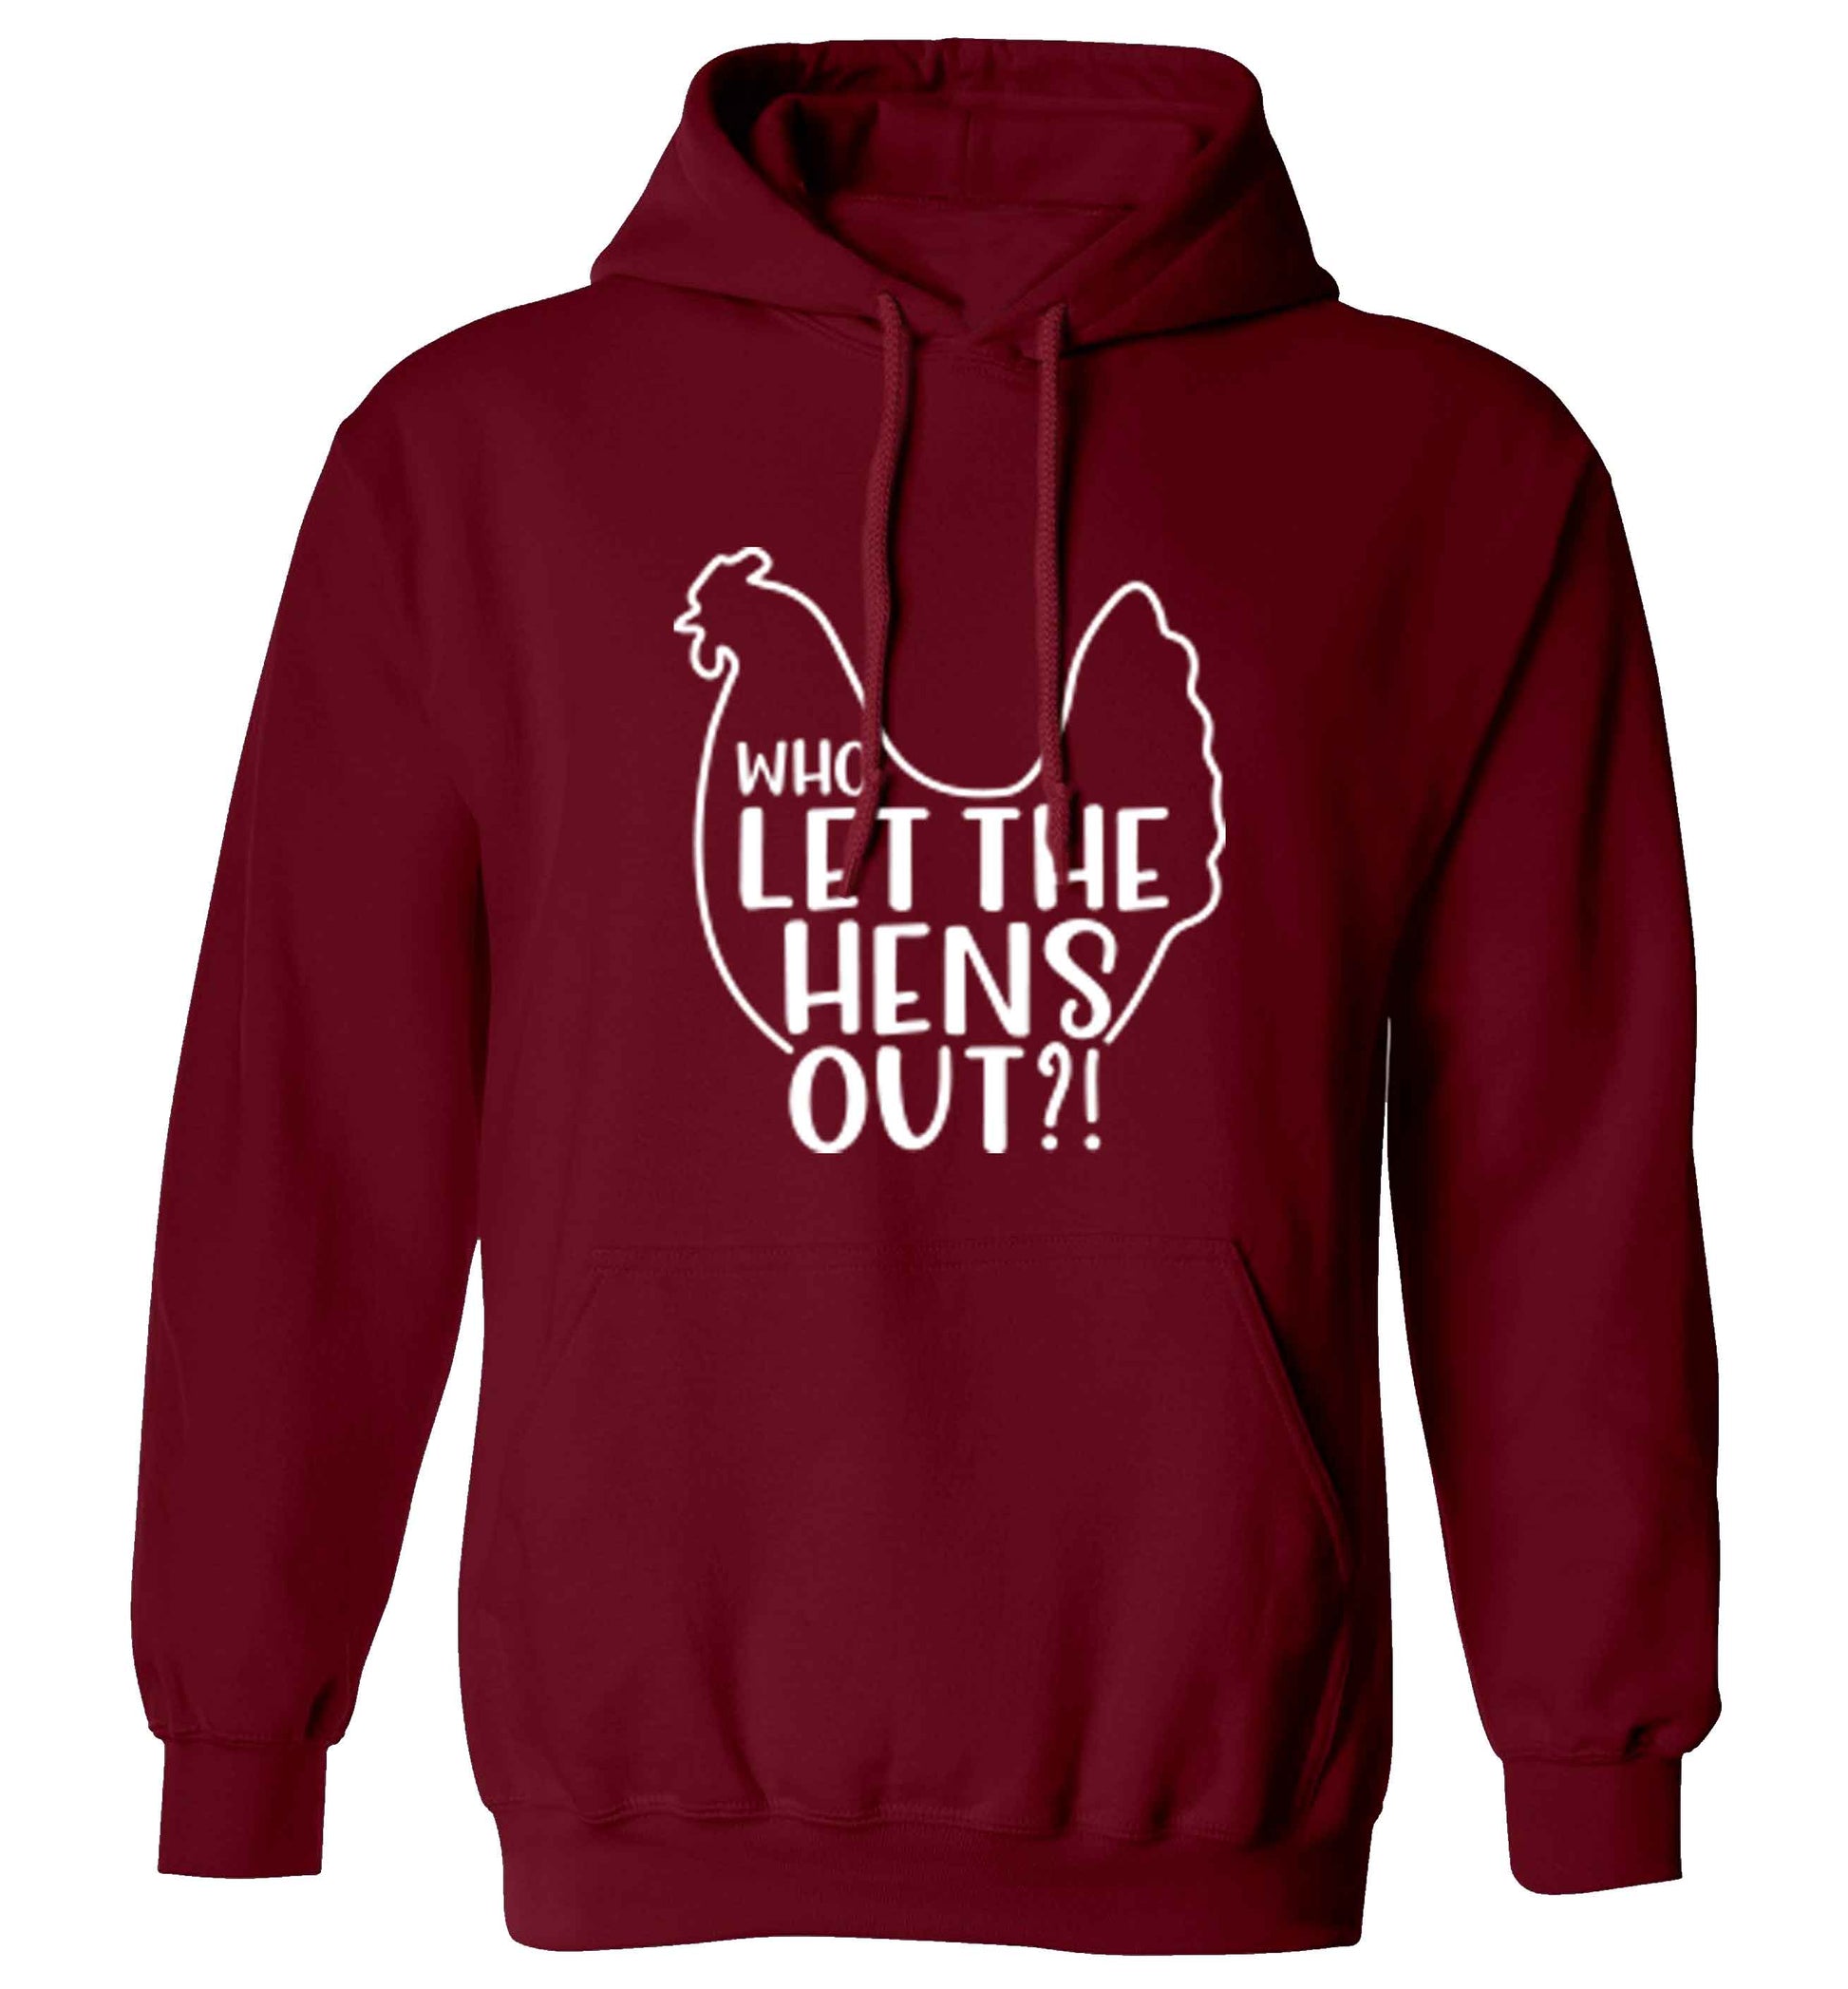 Who let the hens out adults unisex maroon hoodie 2XL